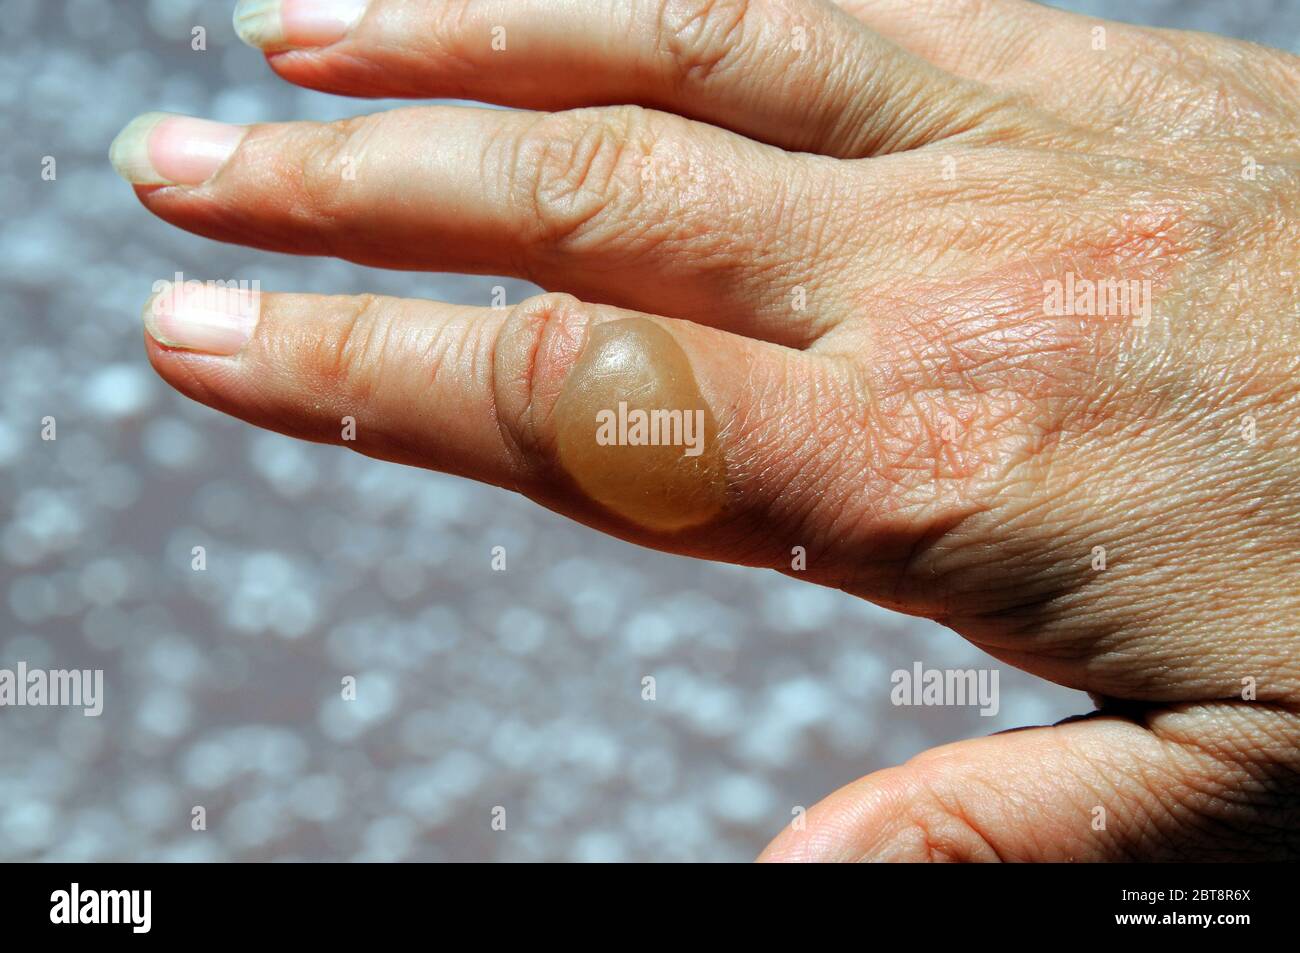 Large blister on womans hand caused by boiling water scald Stock Photo